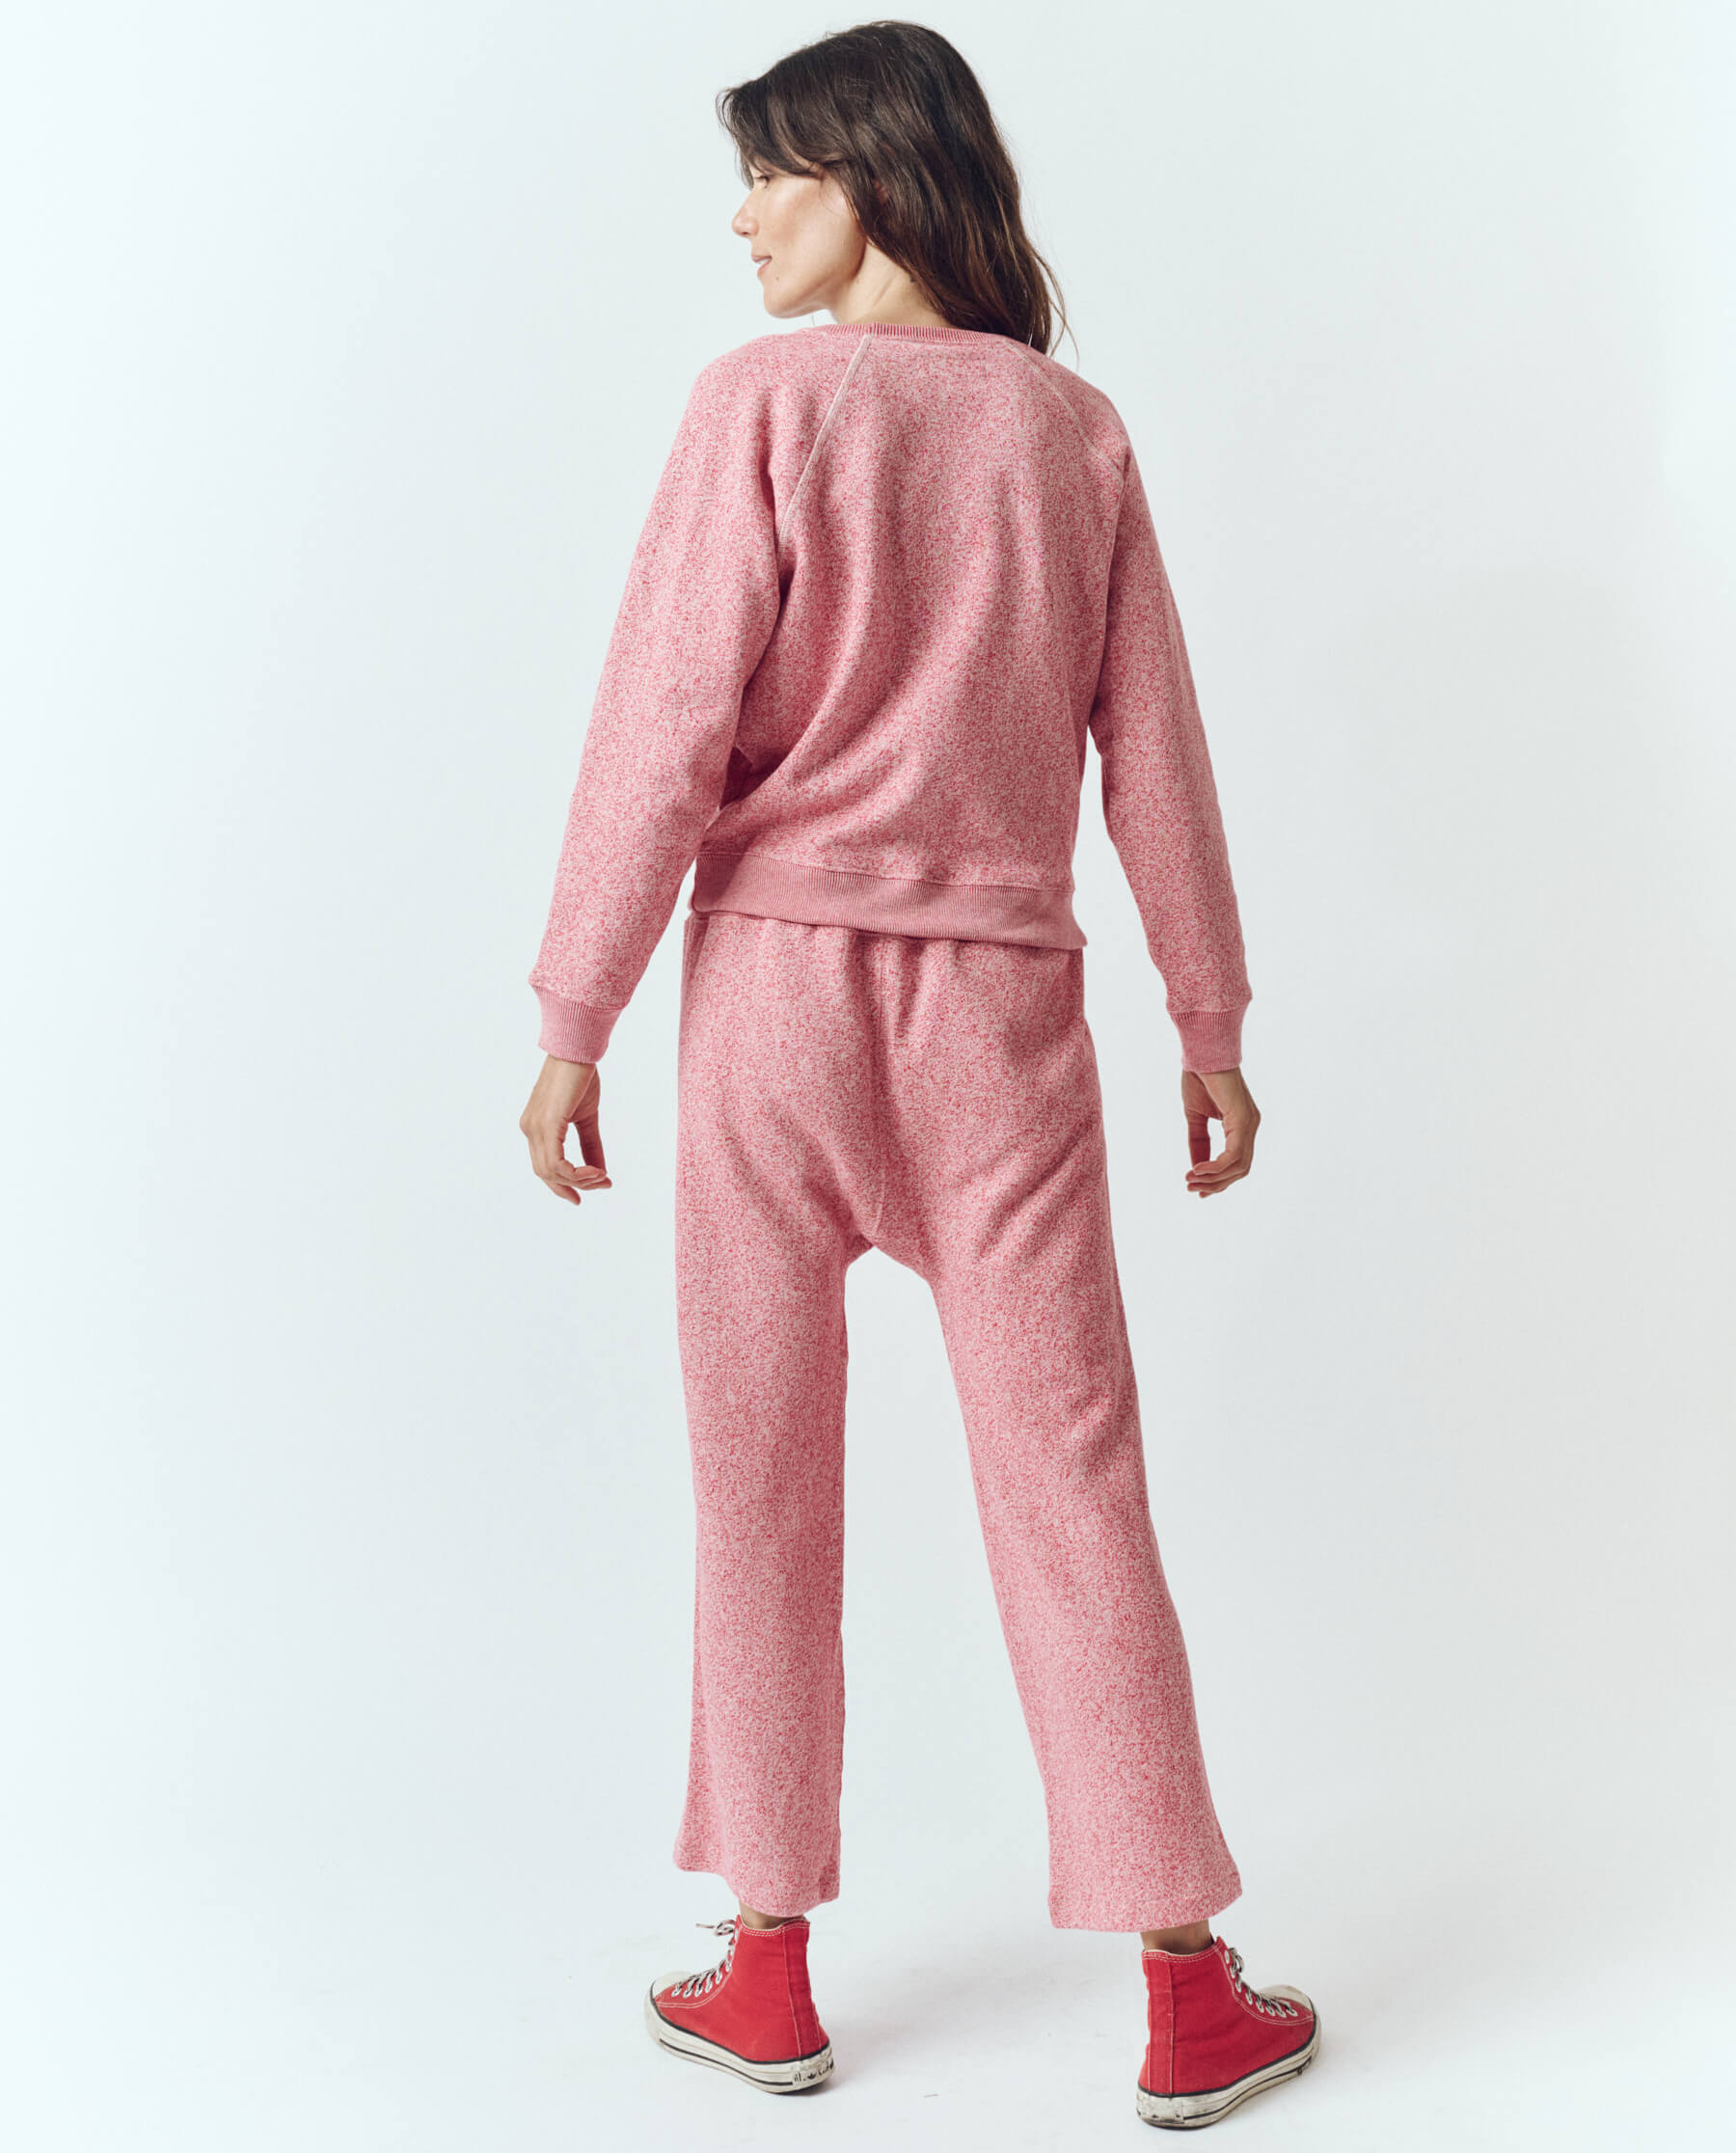 The Relay Sweatpant. -- Heathered Bright Currant